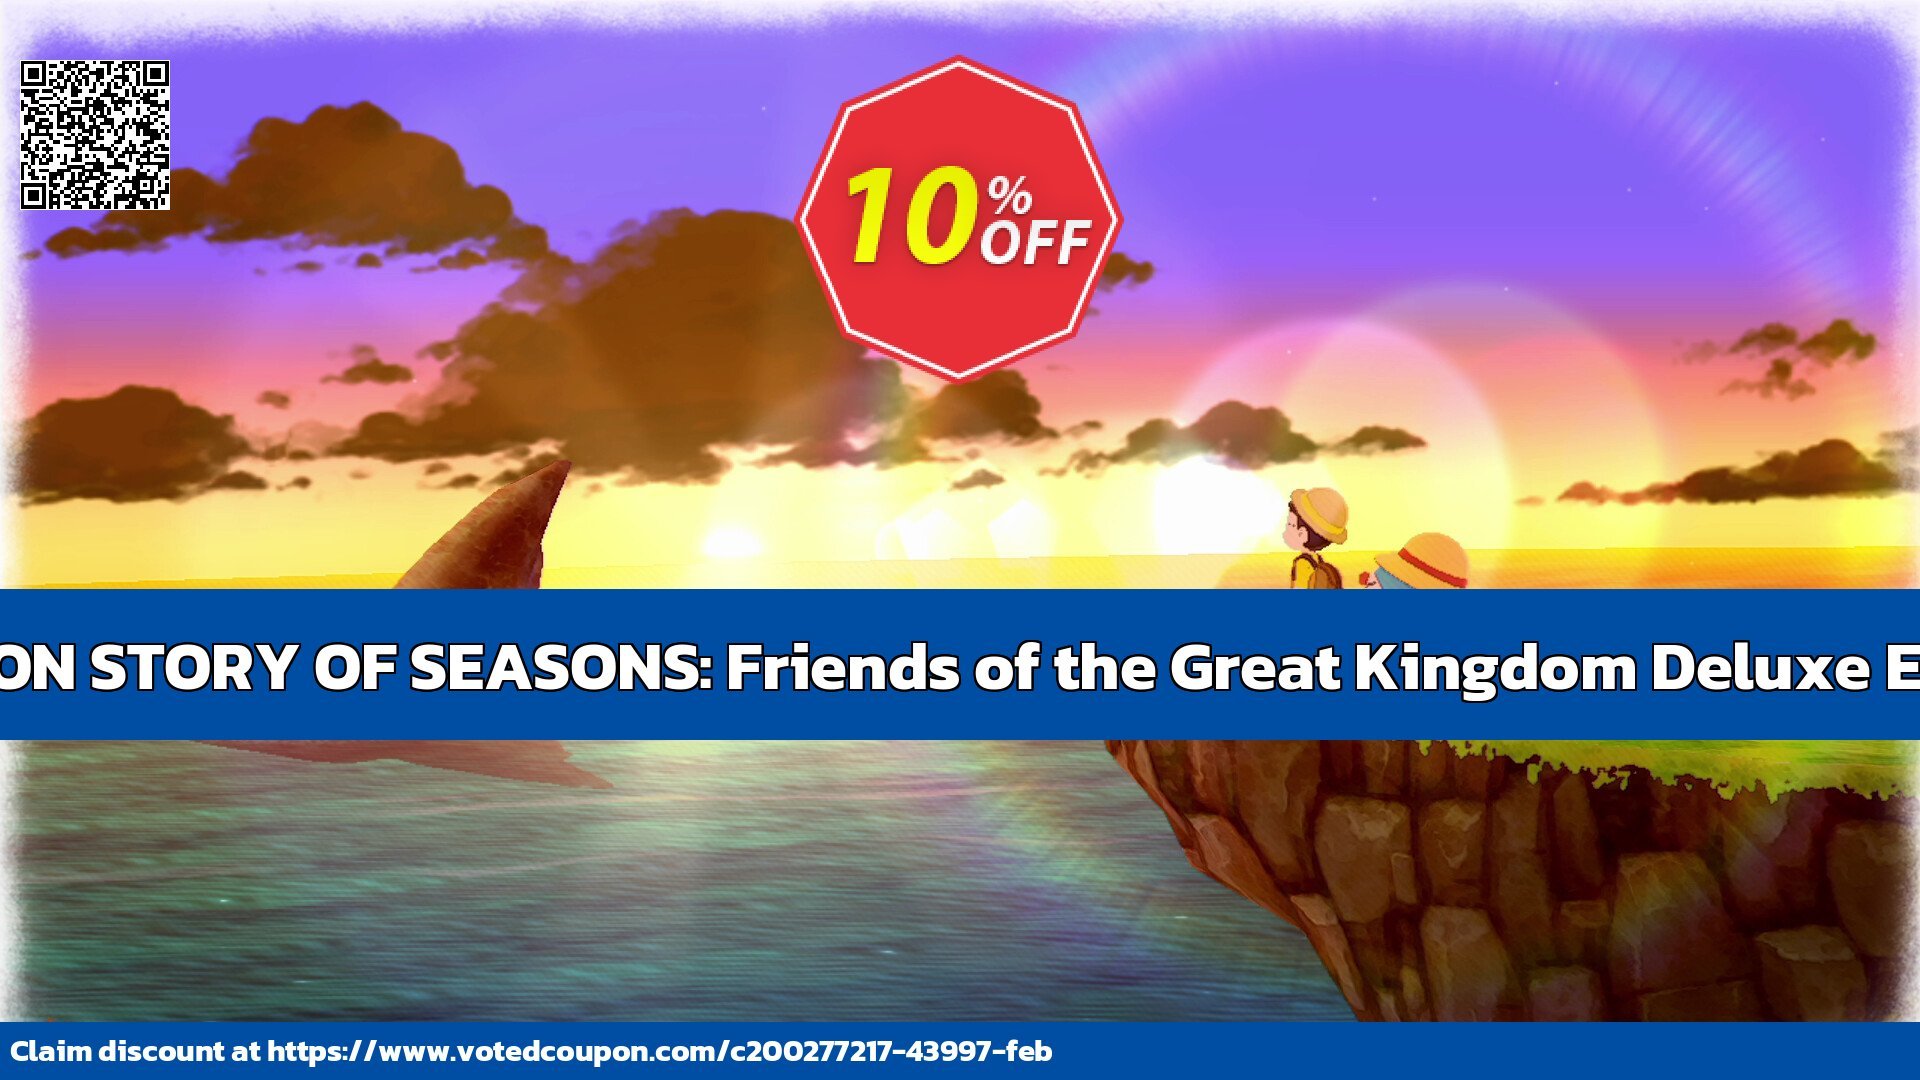 DORAEMON STORY OF SEASONS: Friends of the Great Kingdom Deluxe Edition PC Coupon, discount DORAEMON STORY OF SEASONS: Friends of the Great Kingdom Deluxe Edition PC Deal CDkeys. Promotion: DORAEMON STORY OF SEASONS: Friends of the Great Kingdom Deluxe Edition PC Exclusive Sale offer